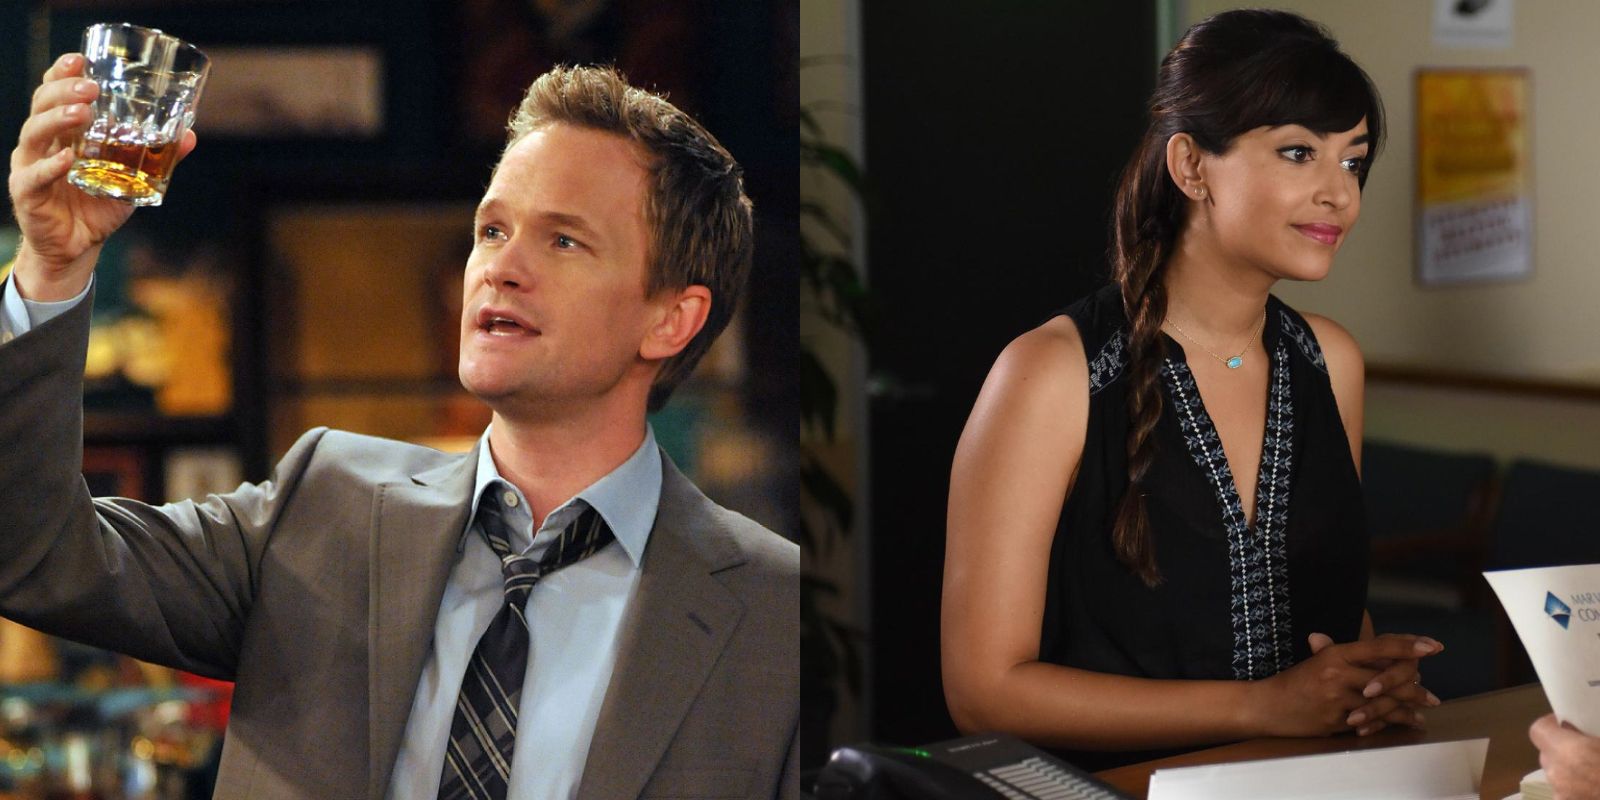 Barney in How I Met Your Mother and Cece in New Girl.